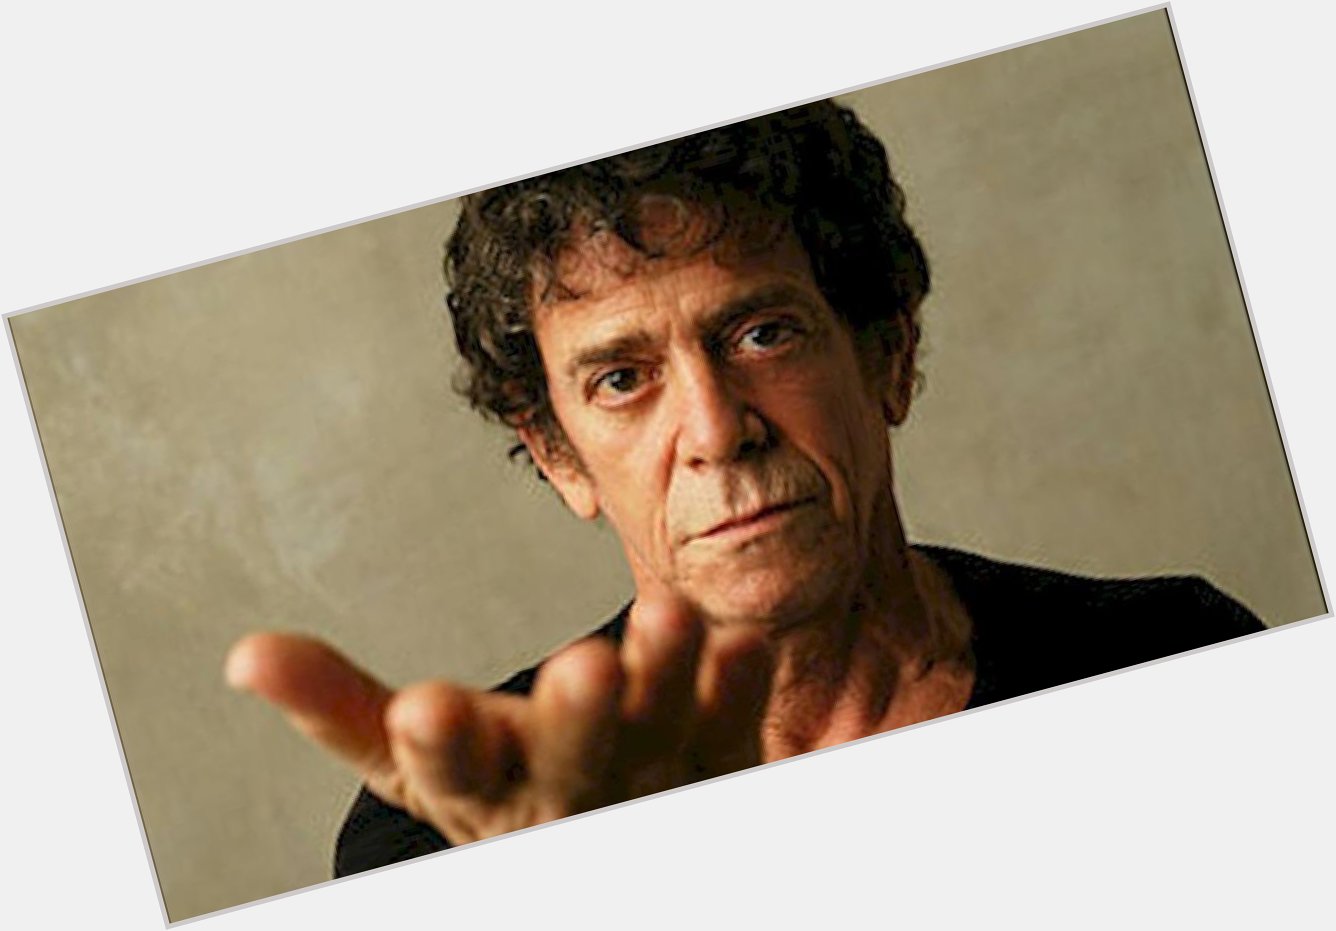  Great pic!
Happy birthday to the great Lou Reed (1942-2013) 